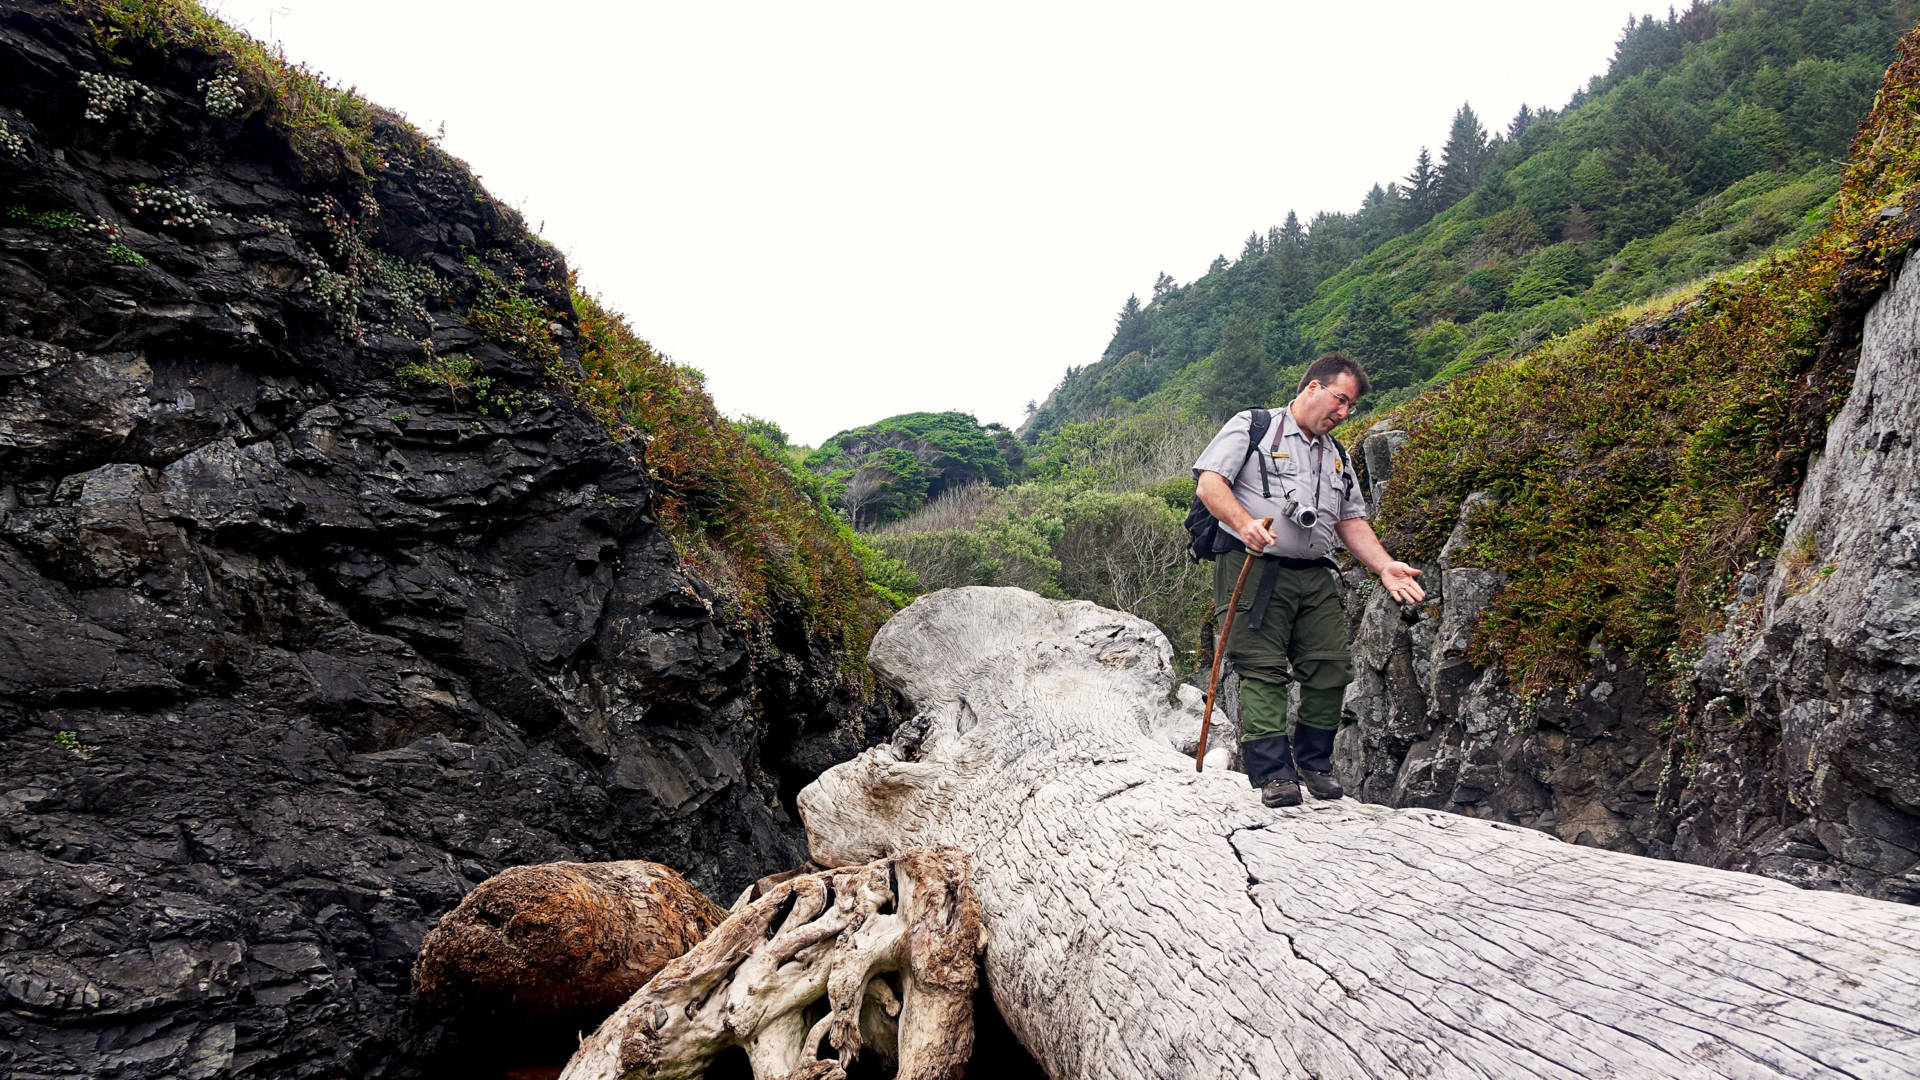 Michael Peterson, an archaeologist at Redwood National Park in California, photographs the coastline annually to monitor erosion of archaeological sites. Jes Burns/OPB/EarthFix